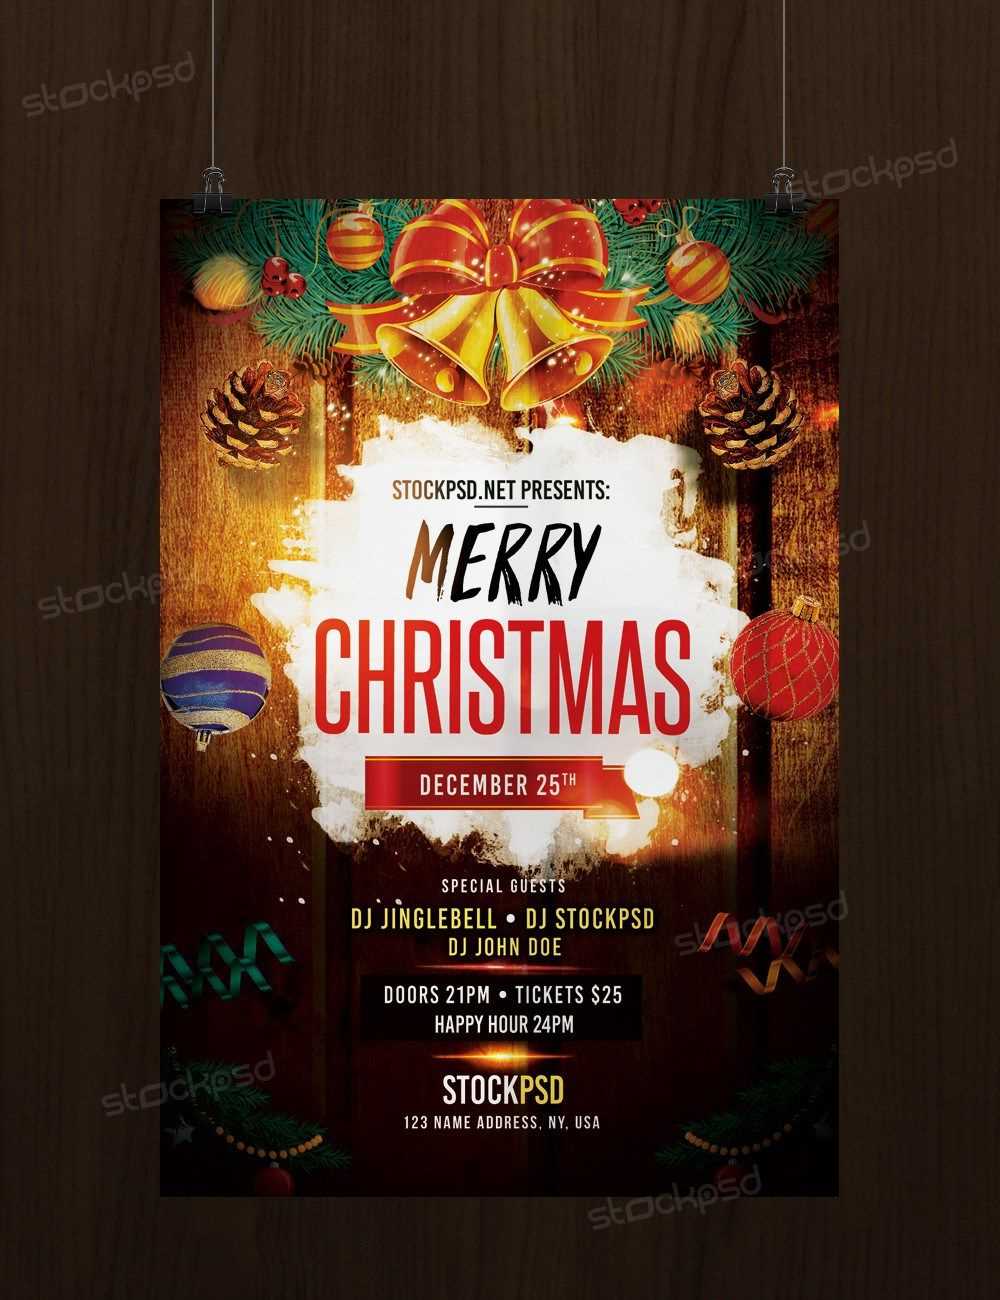 Download Merry Christmas – Free Psd Flyer Template | Free With Regard To Christmas Brochure Templates Free